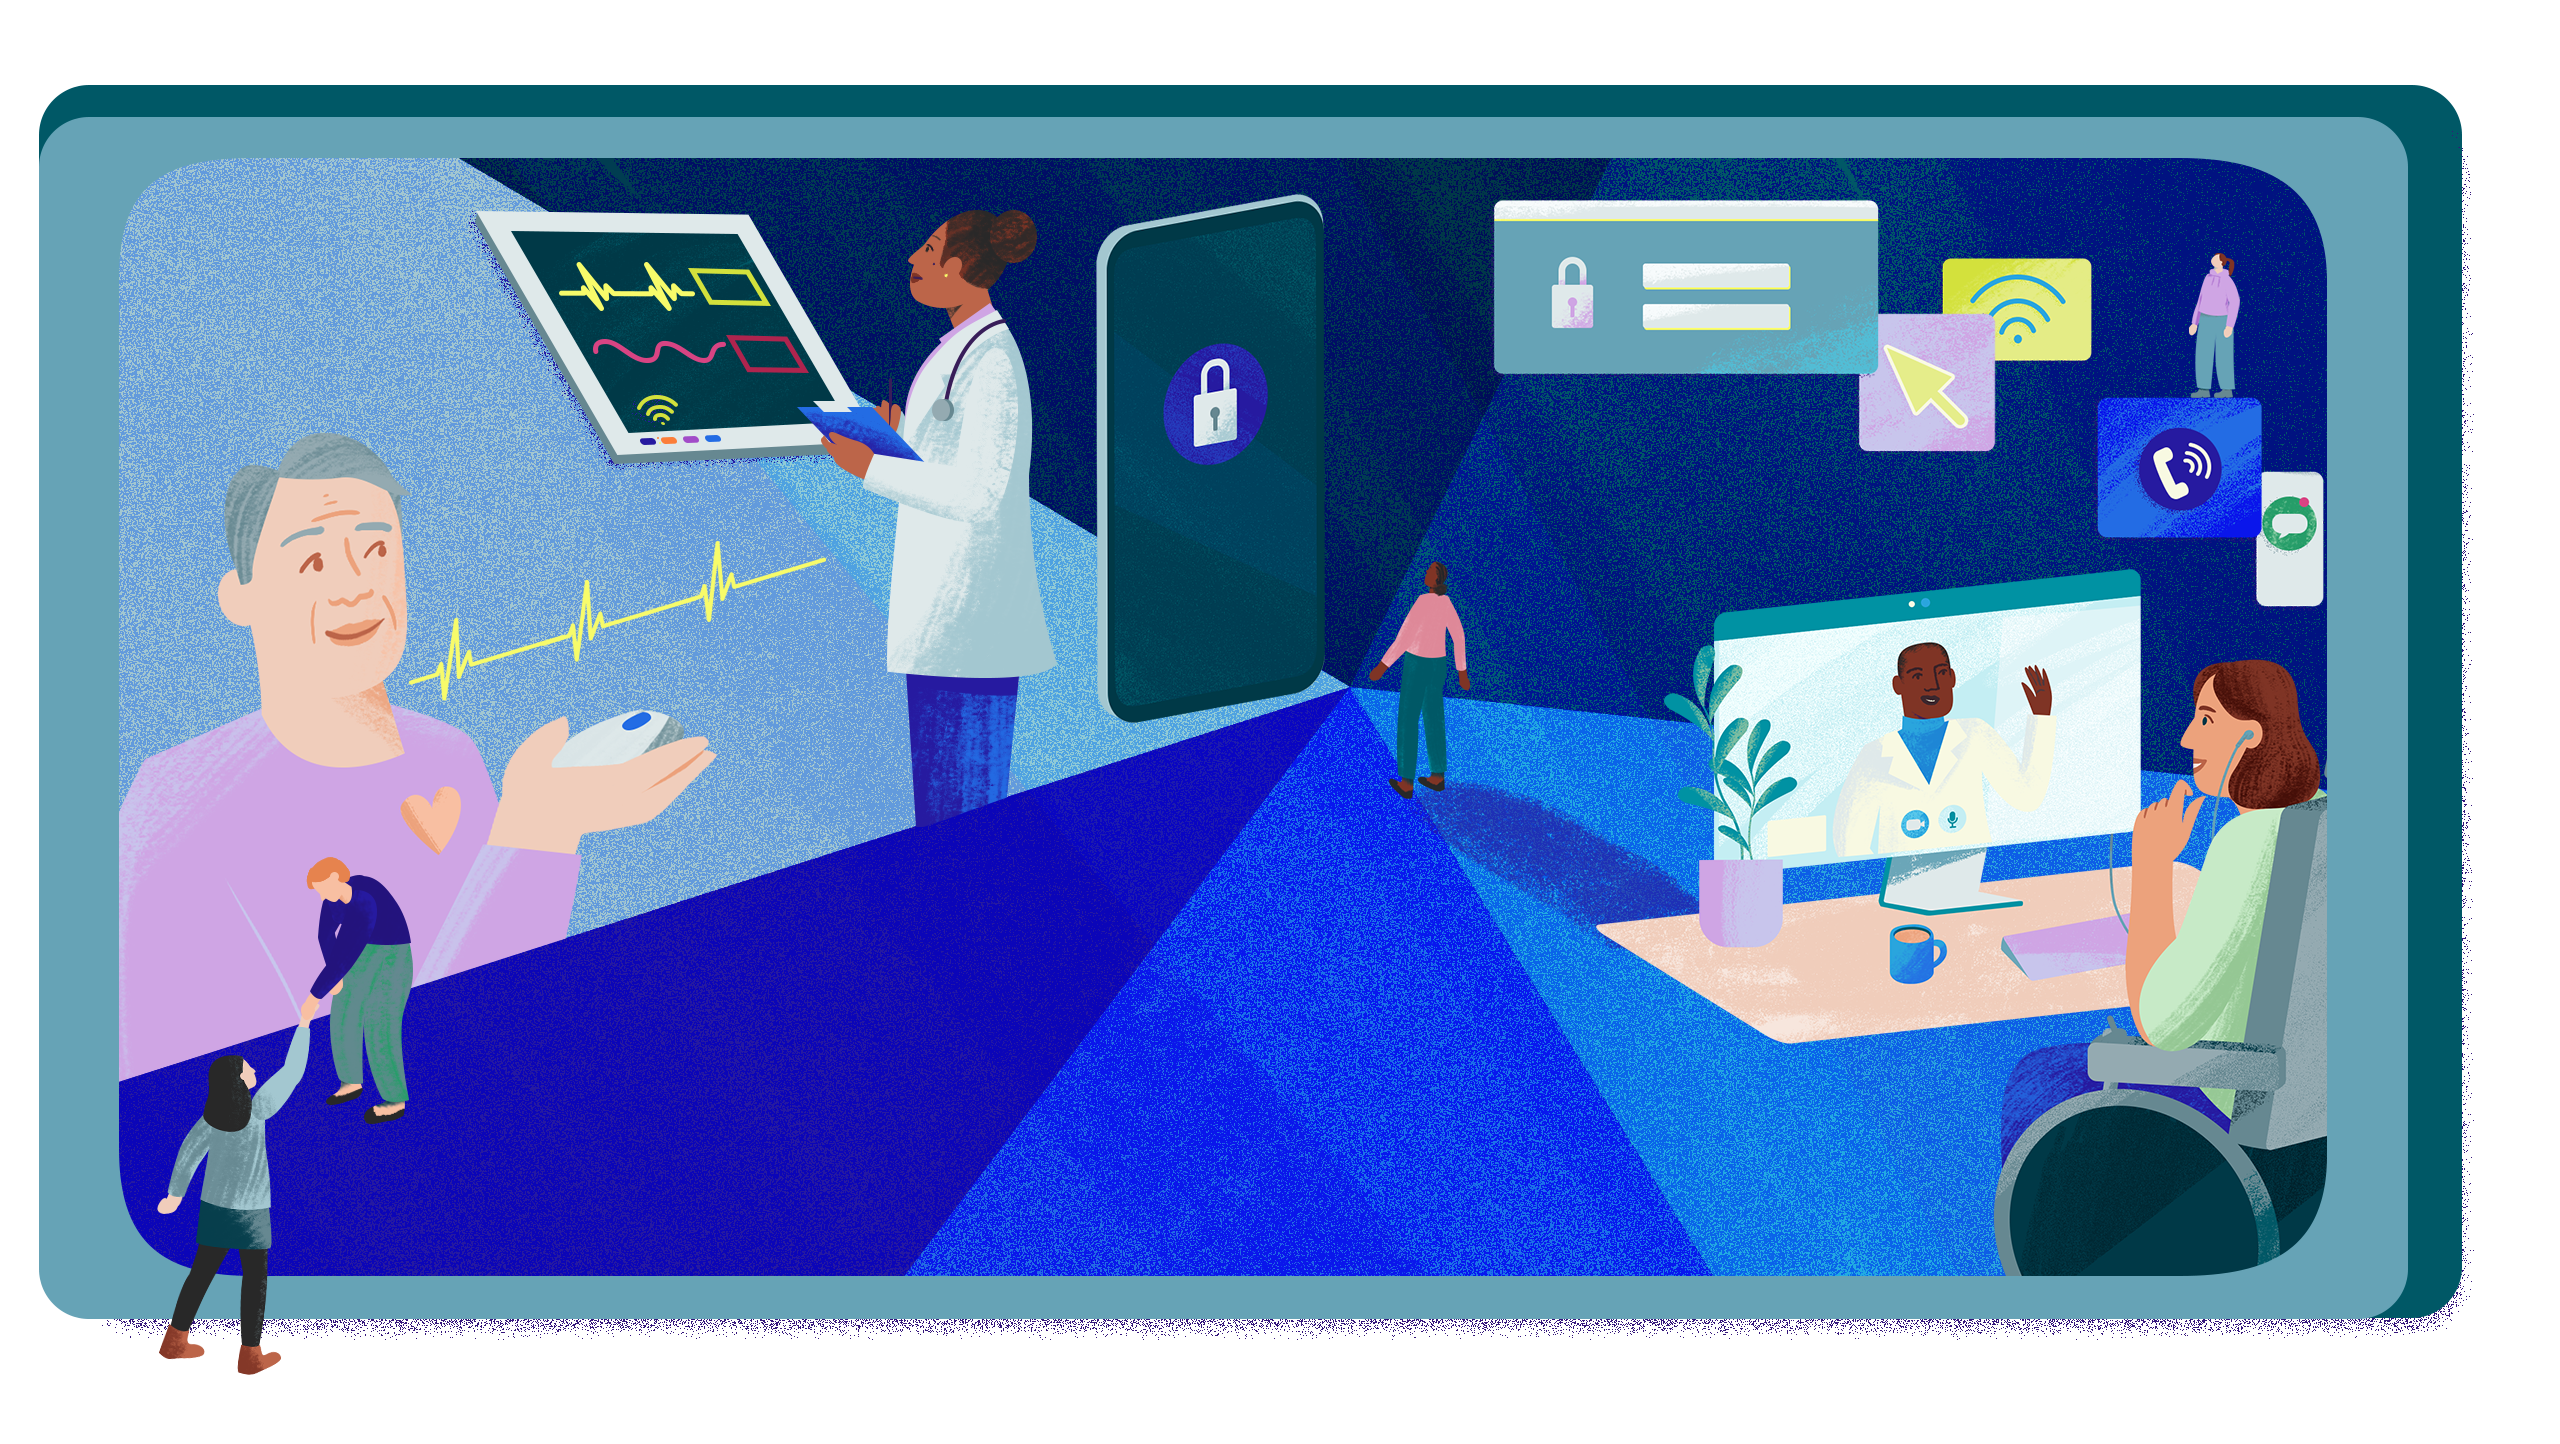 A collection of illustrations showing different people using technology to manage their healthcare